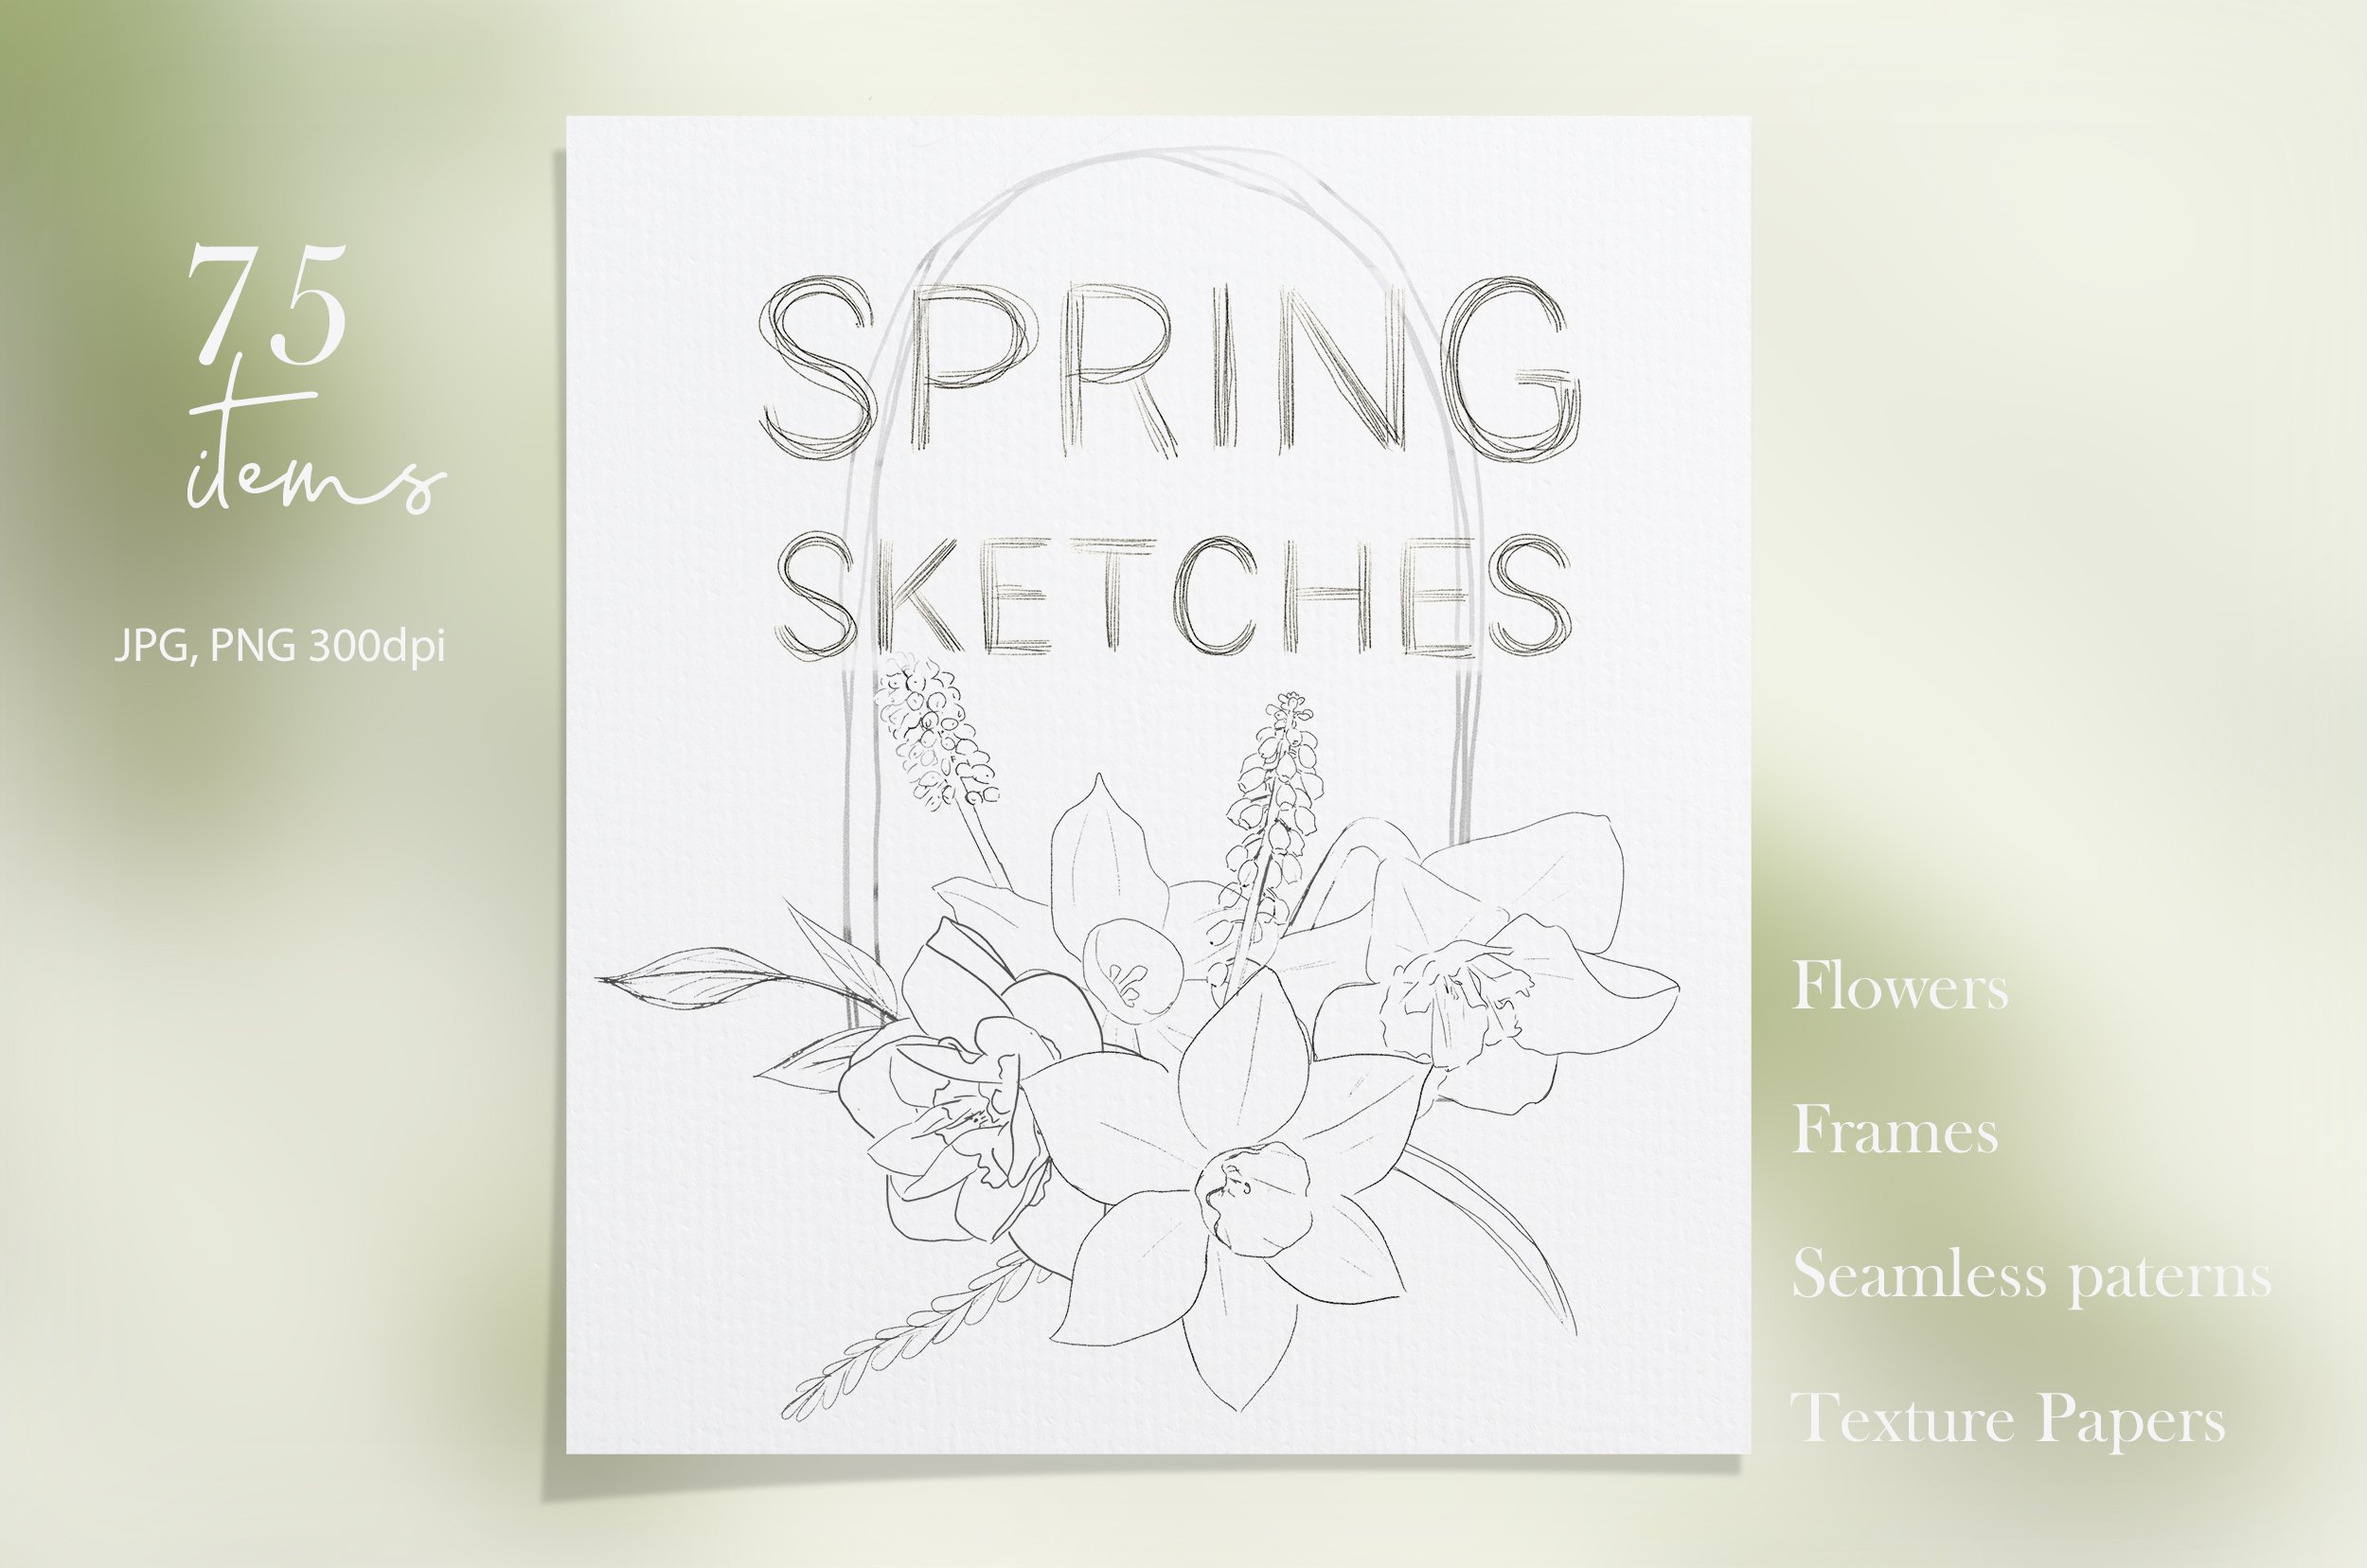 Pencil Sketches of Spring Flowers cover image.